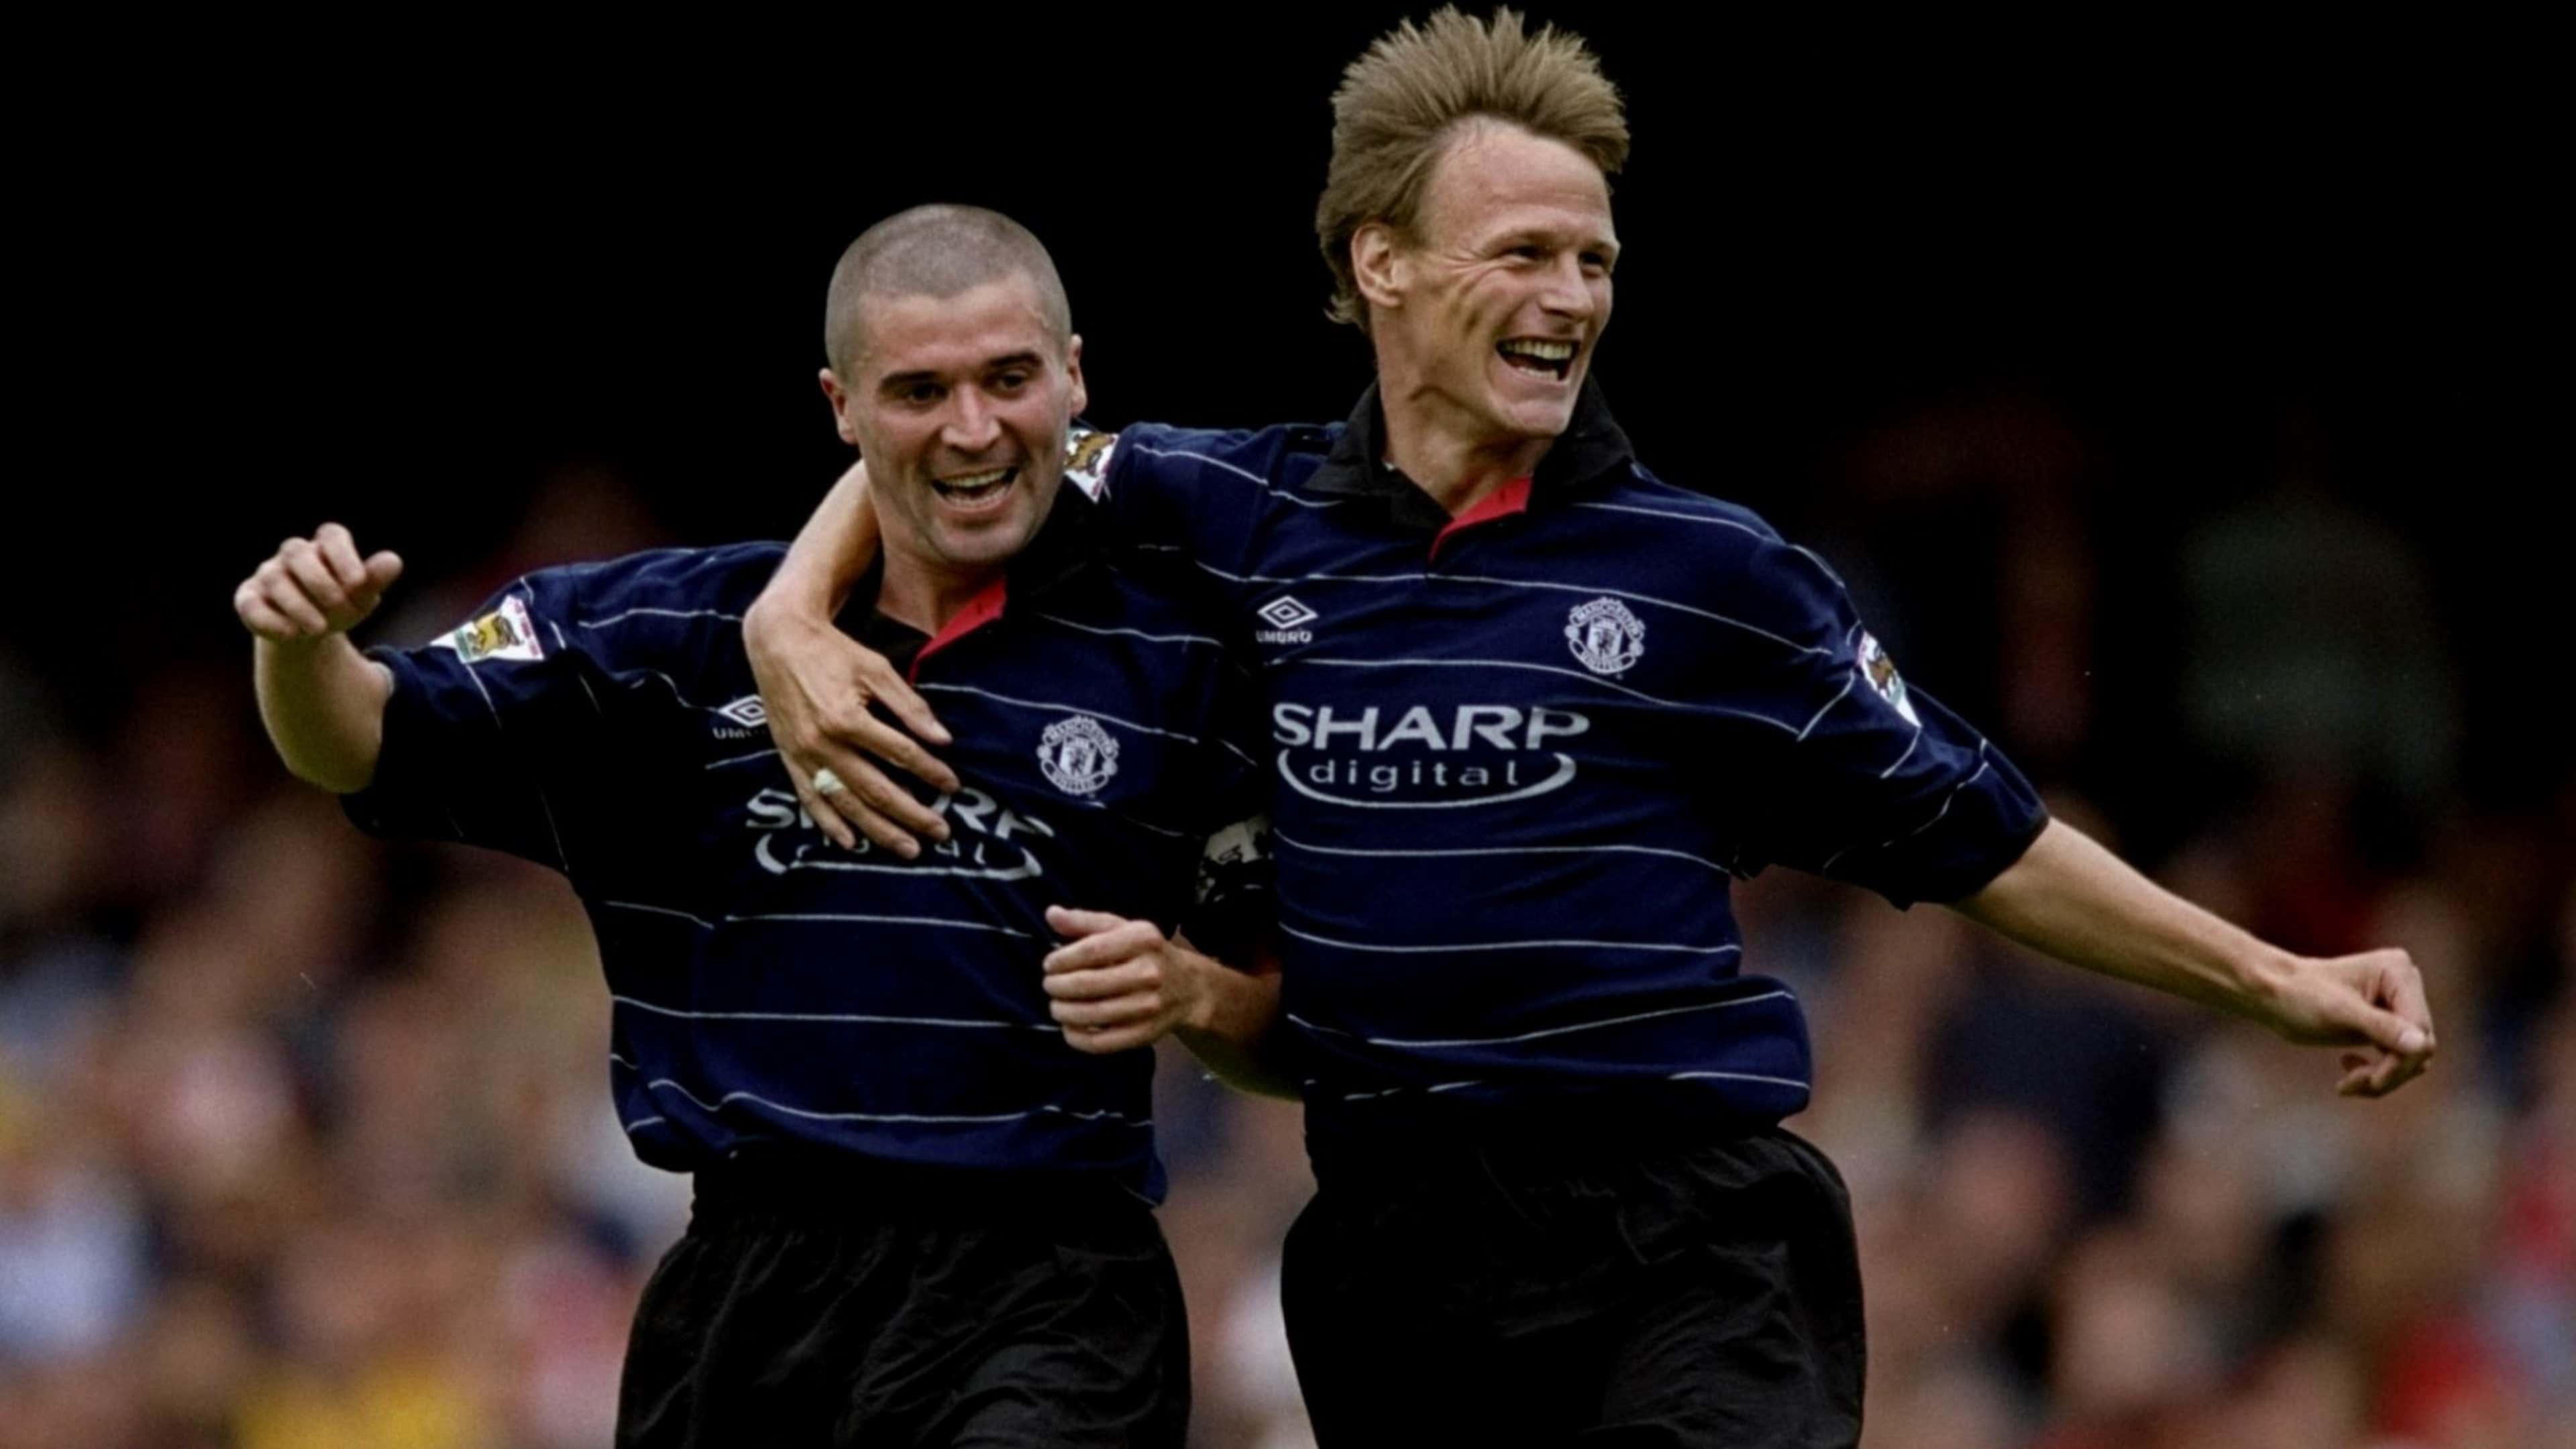 Man Utd's top 10 away and third kits of all time - ranked